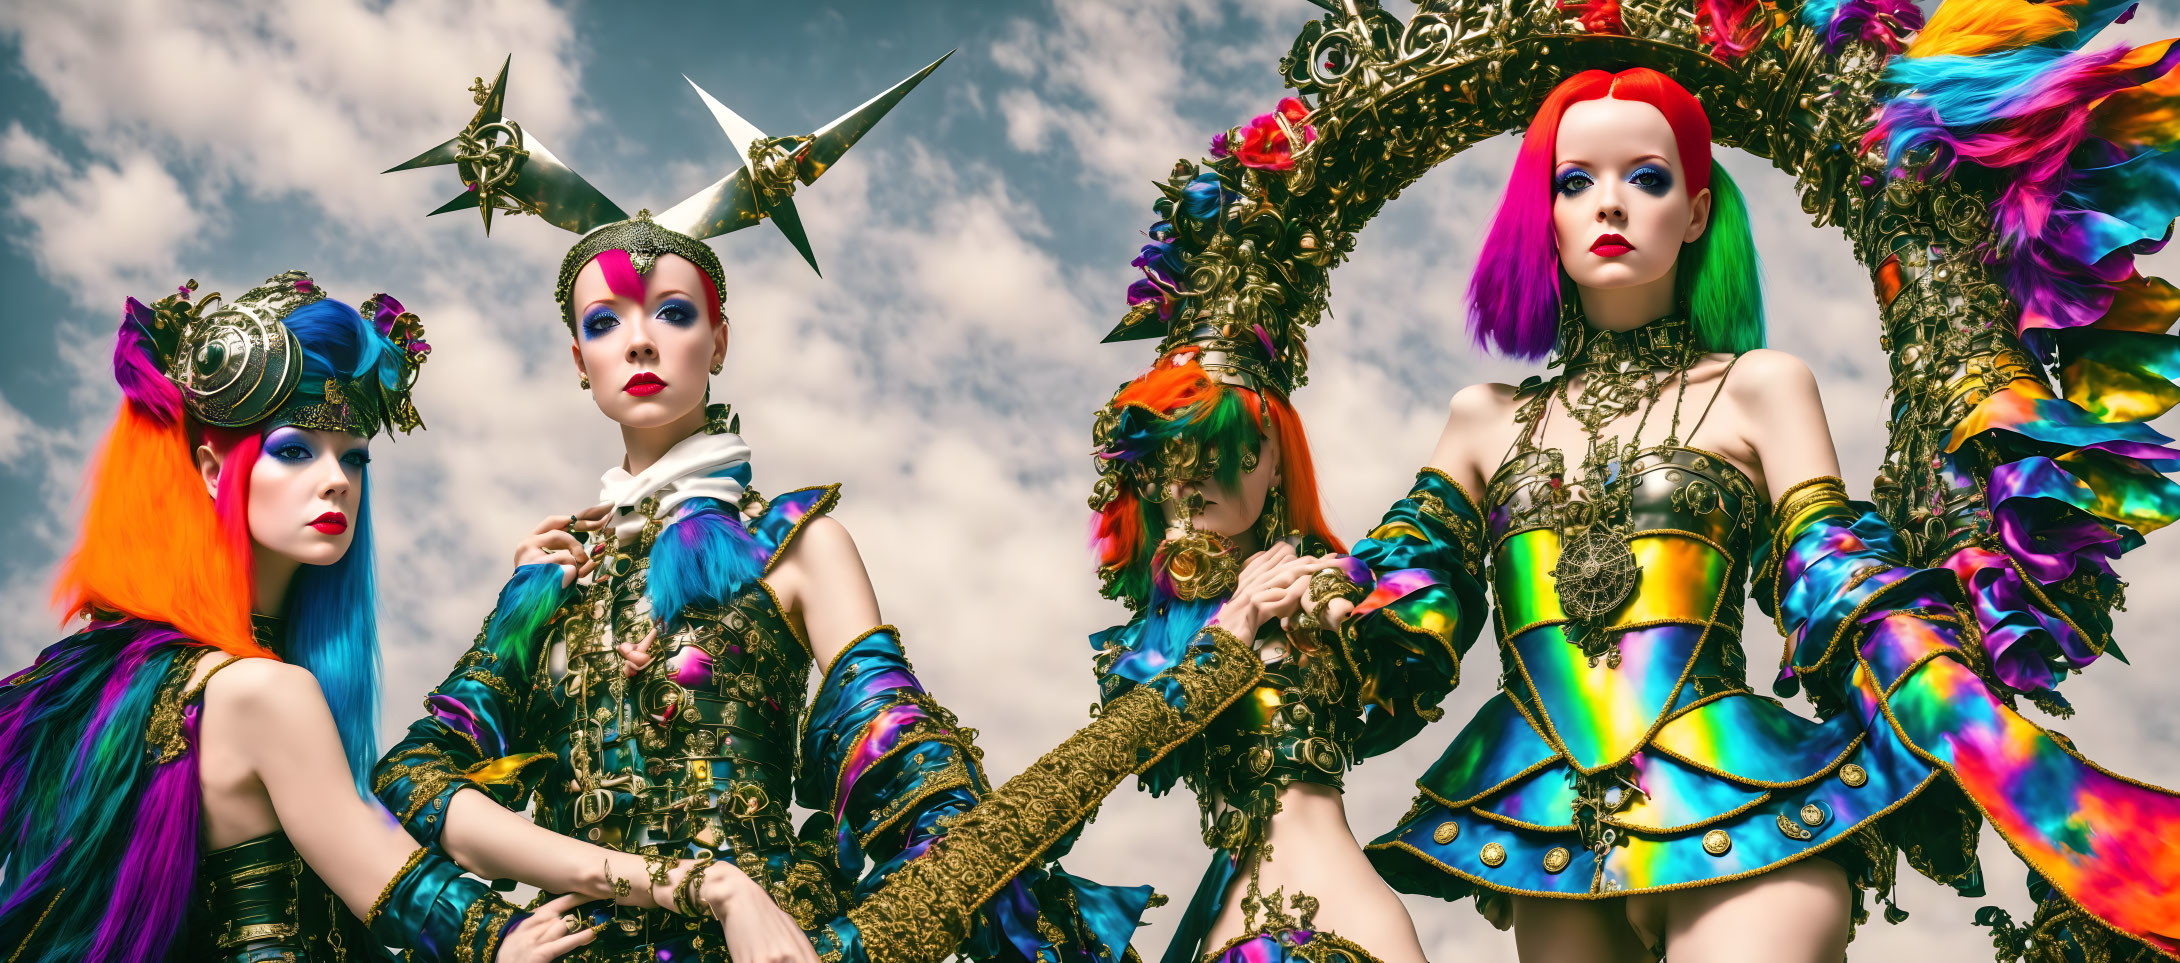 Four models in avant-garde makeup and futuristic costumes with ornate props against cloudy sky